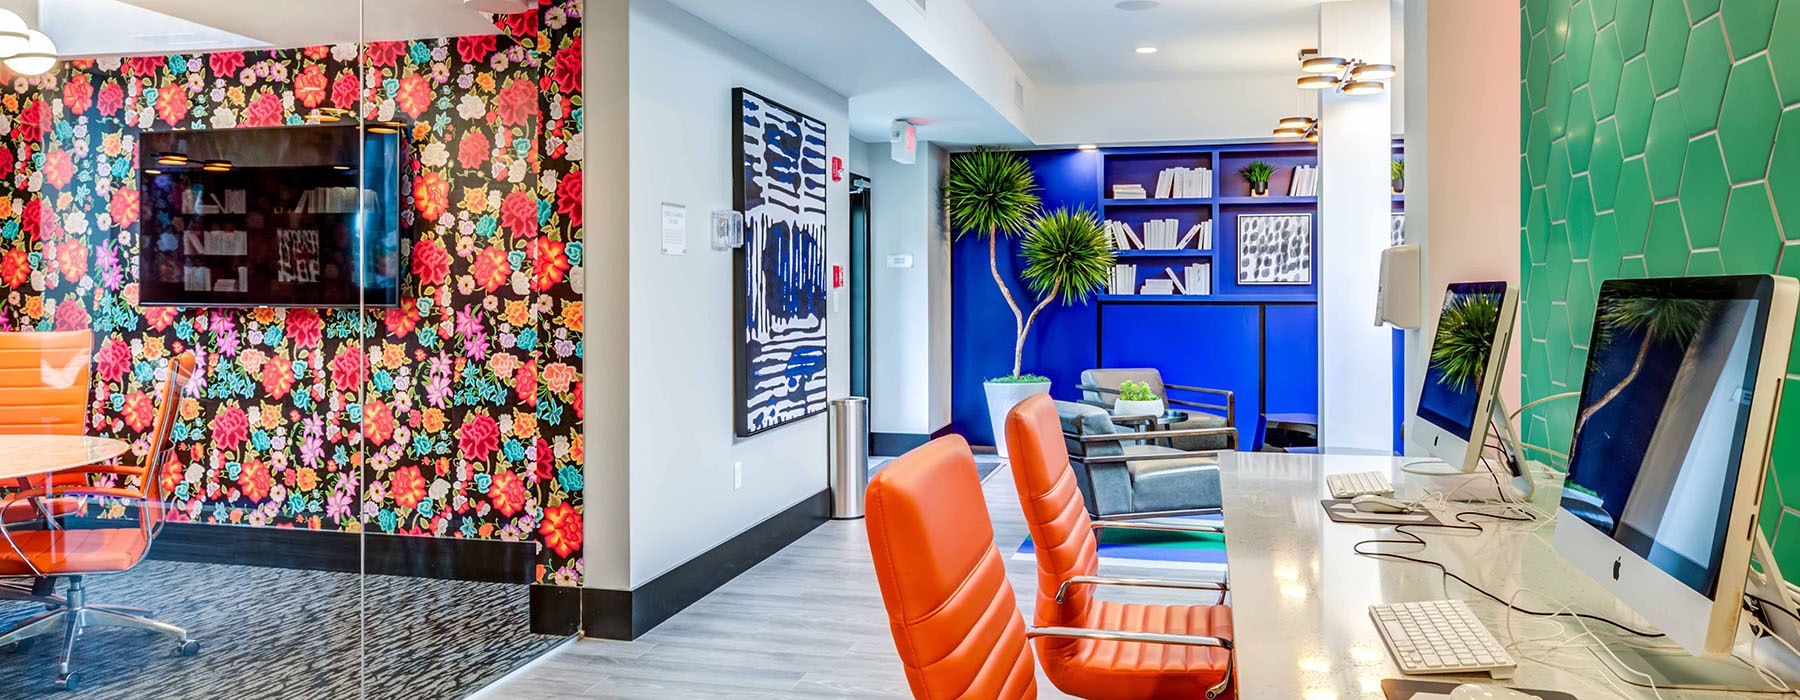 modern business center with colorful decor and a private meeting space